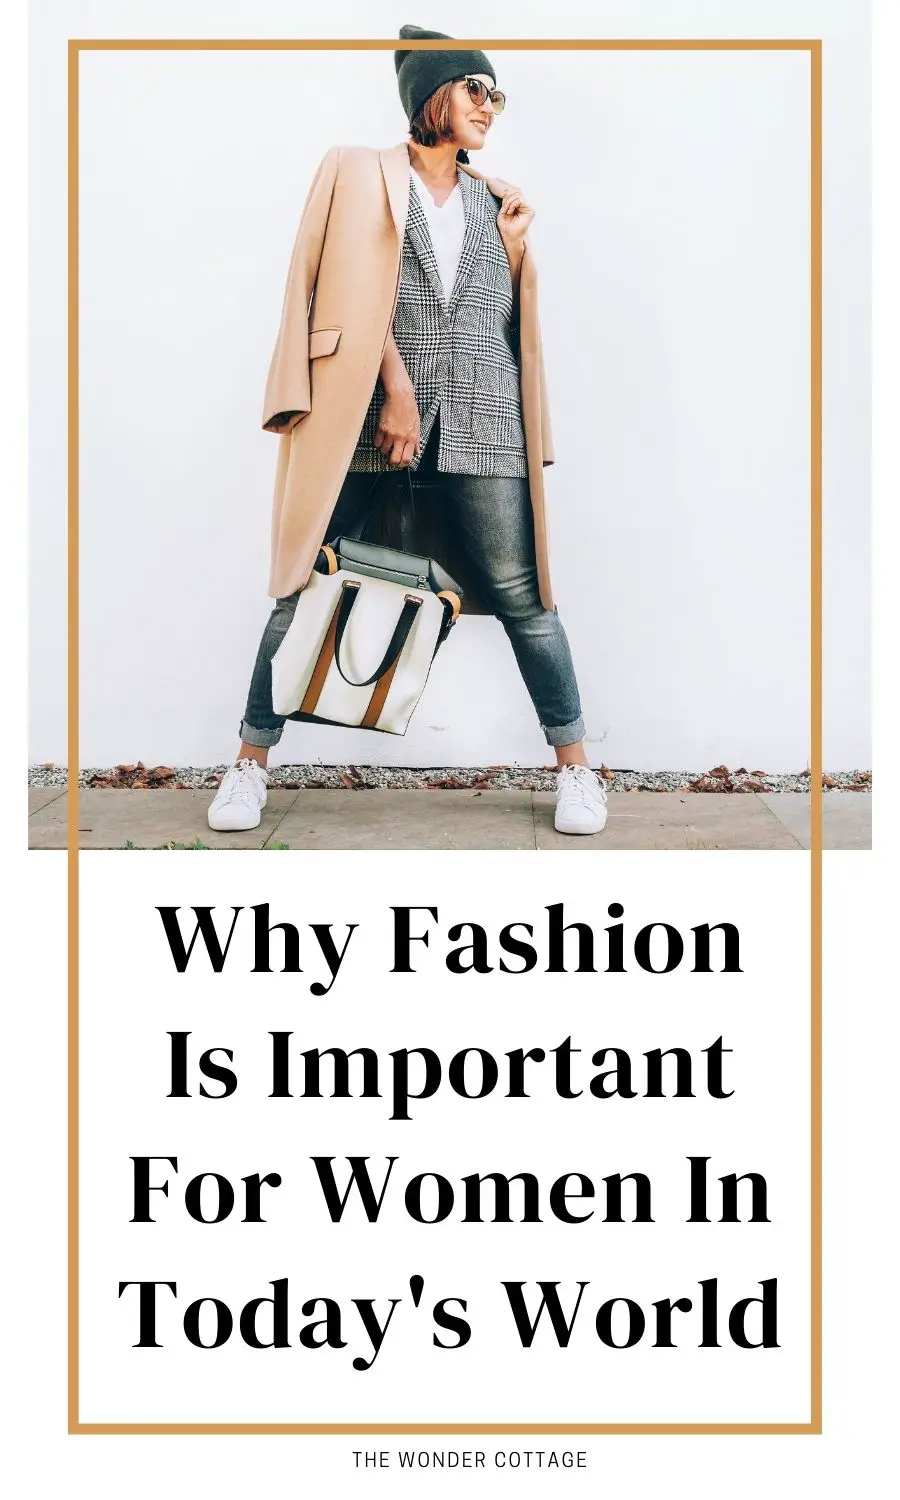 Why Fashion Is Important For Women In Today's World